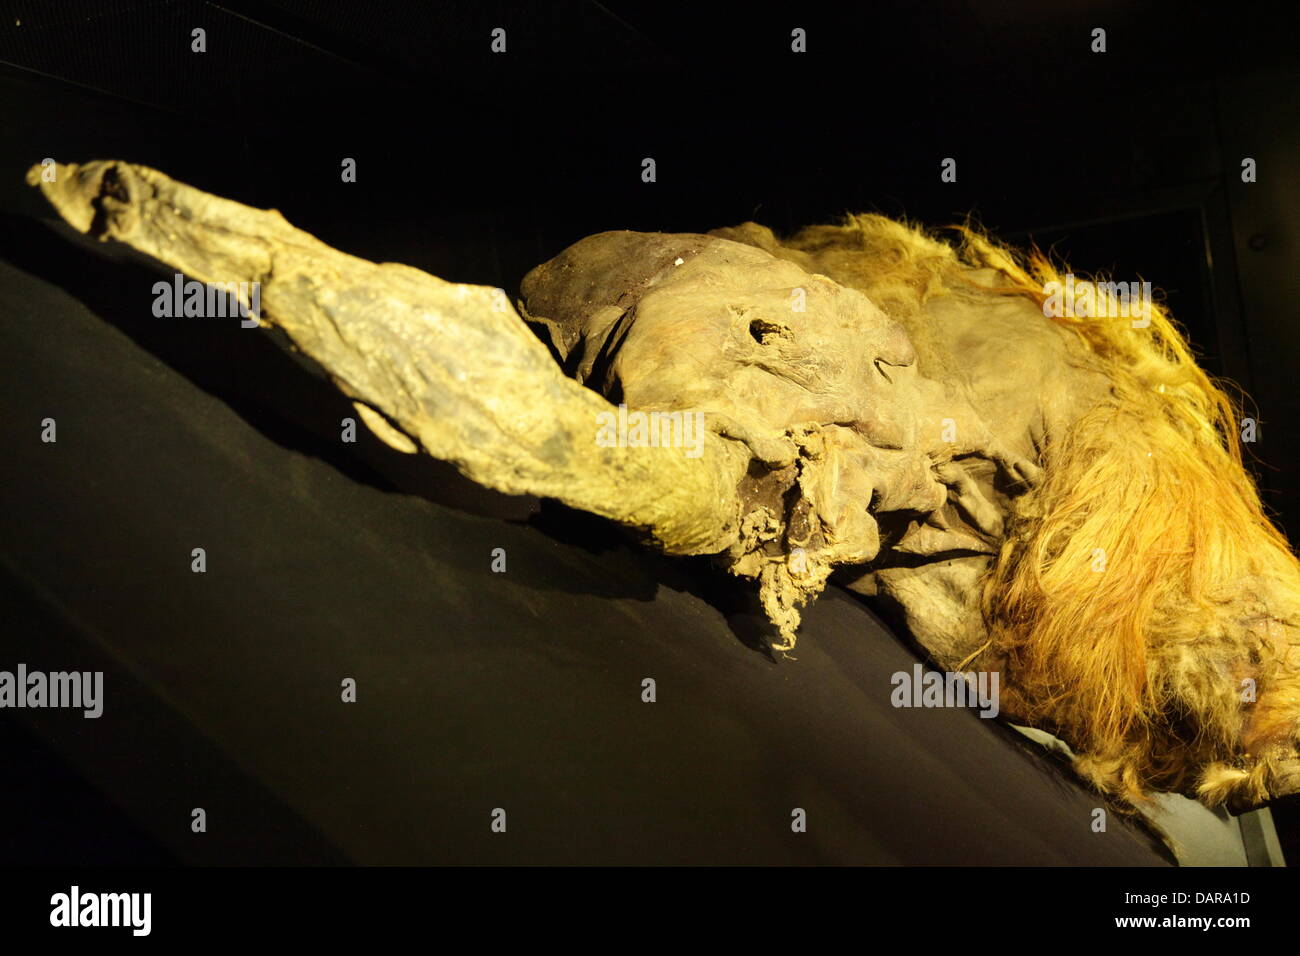 July 12, 2013, Tokyo, Japan - A 39,000-year-old female mammoth is displayed at an exhibition hall in Yokohama, south of Tokyo. The woolly animal was found frozen last May in the New Siberian Islands, also known as Novosibirsk Islands, Siberia. The body is in perfect condition; in fact it is considered the best preserved specimen of a mammoth ever found. A well-preserved sample of blood was found together with the corpse, and scientists claim that it may be used to regrow one of these animals that became extinct around 4000 years ago. The mammoth will be on display for tourists and visitors fro Stock Photo